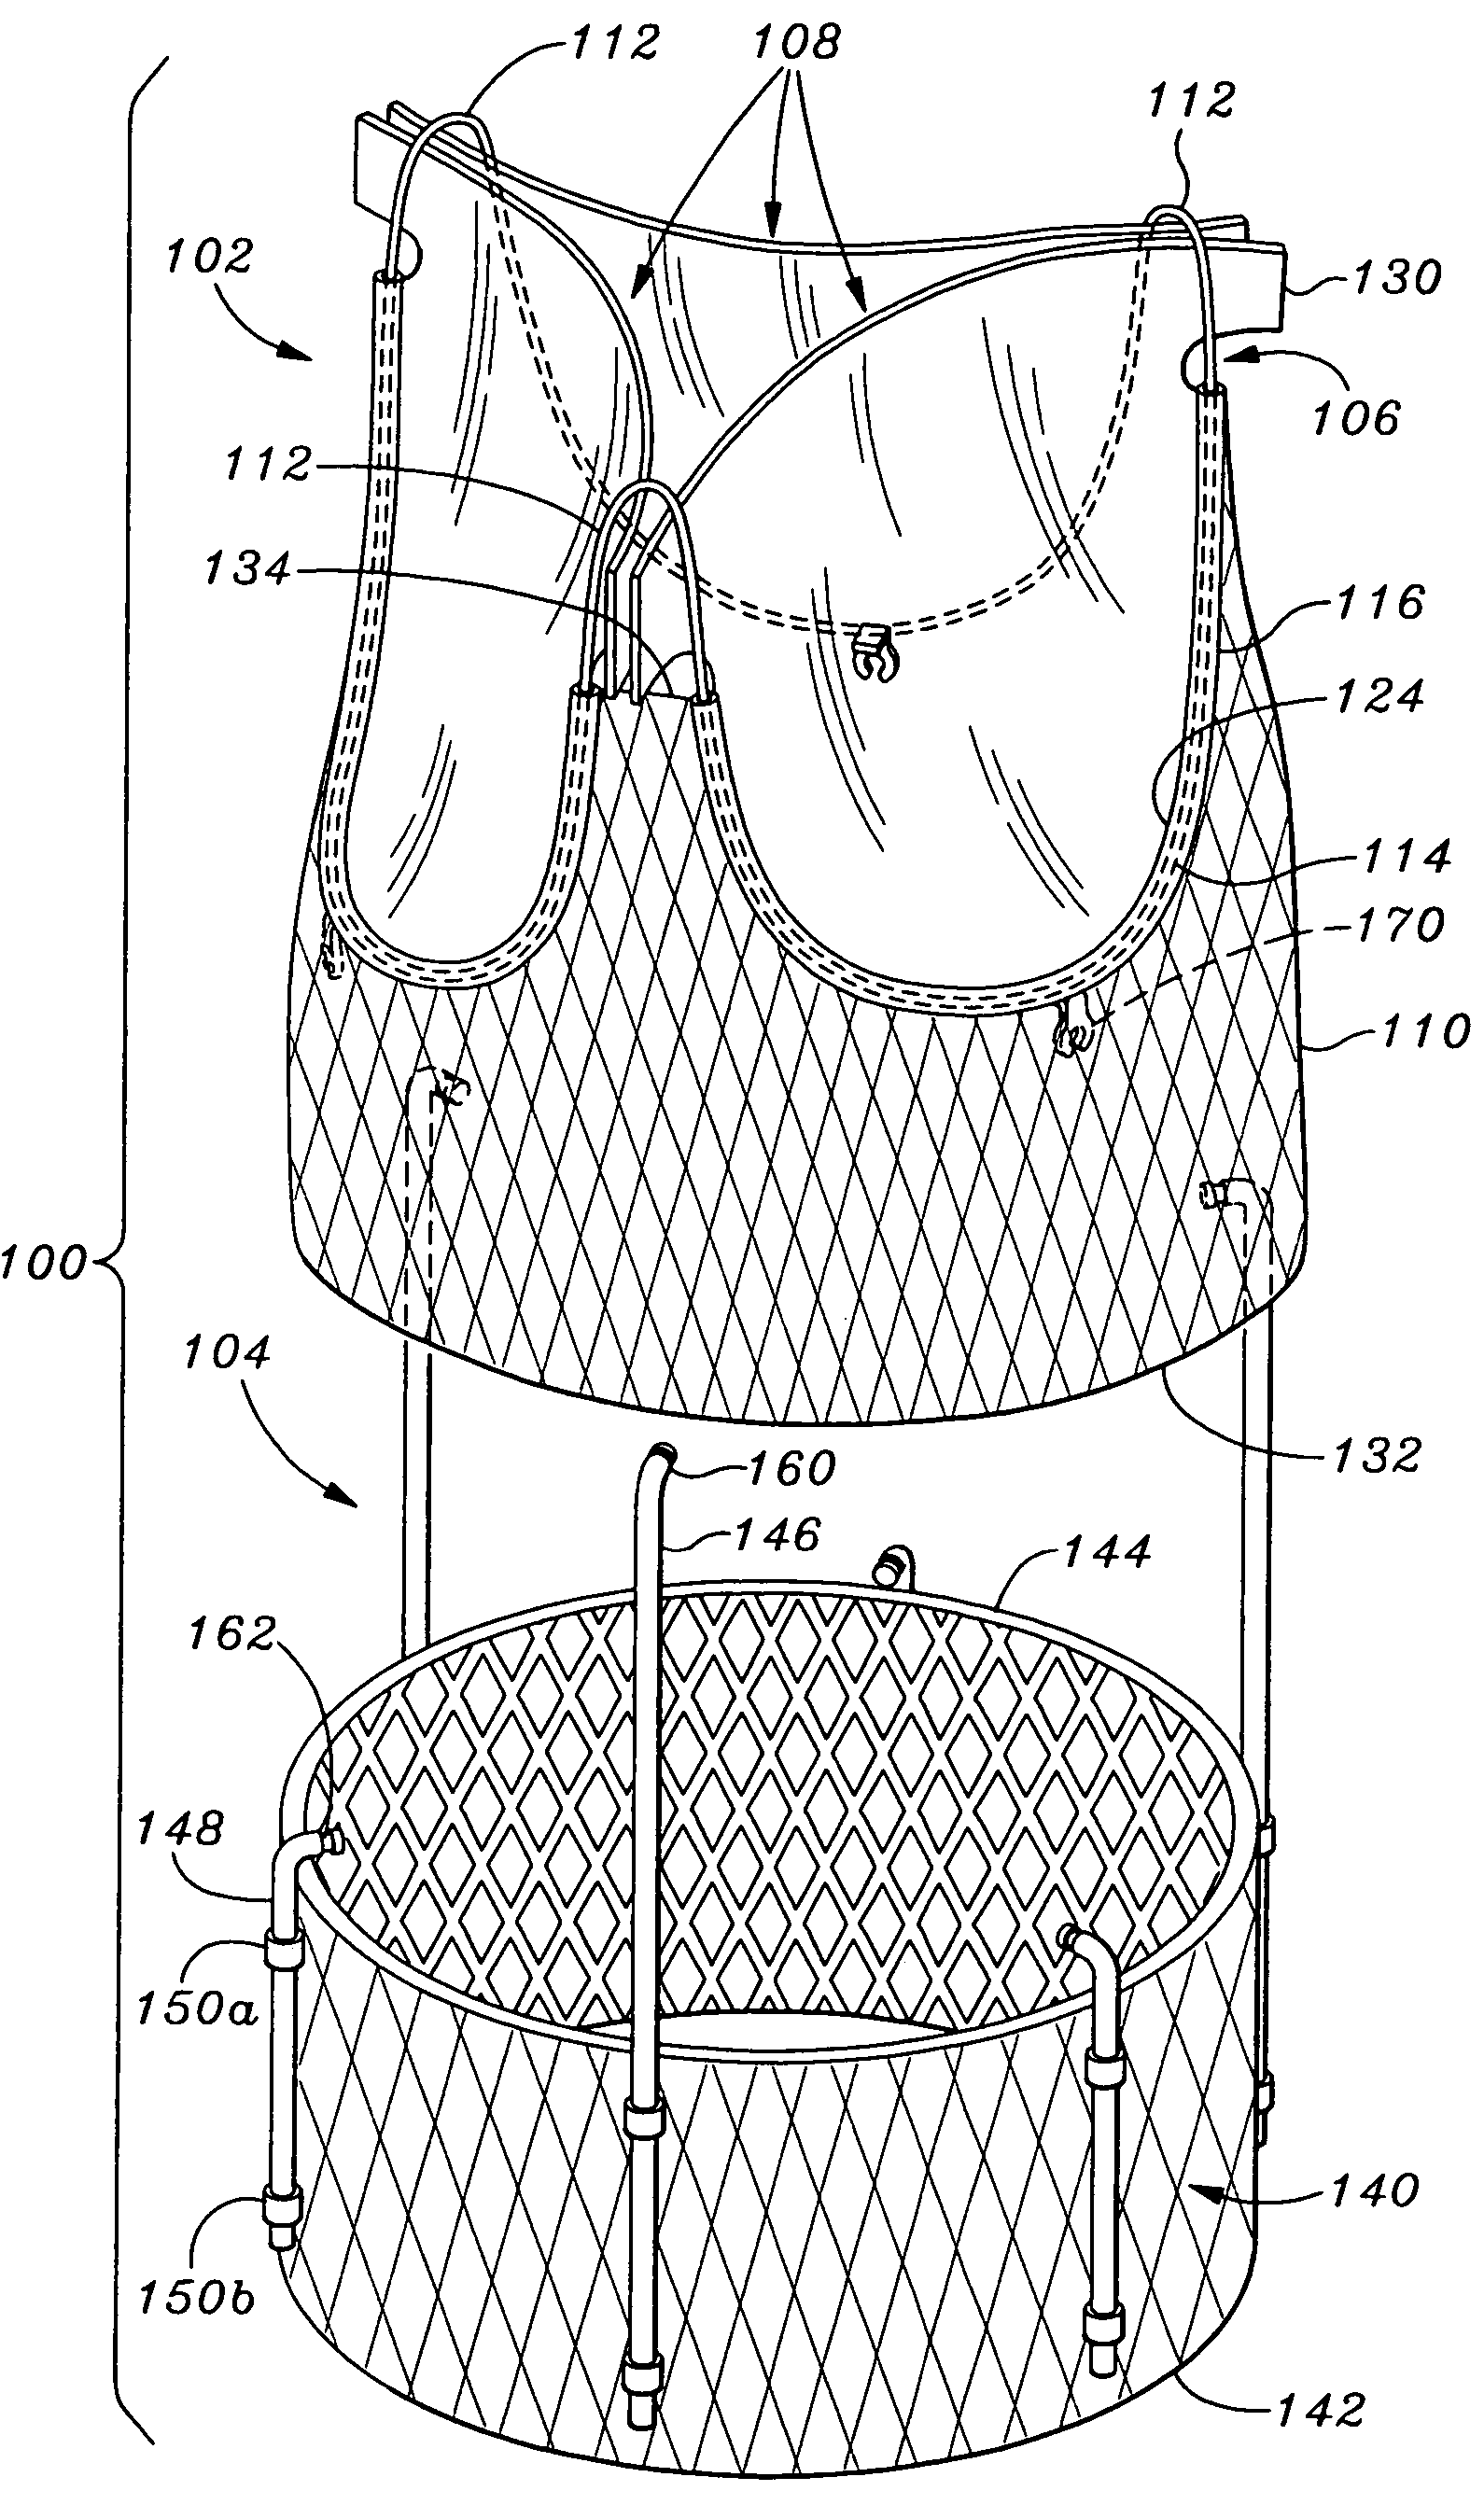 System and method for implanting a two-part prosthetic heart valve